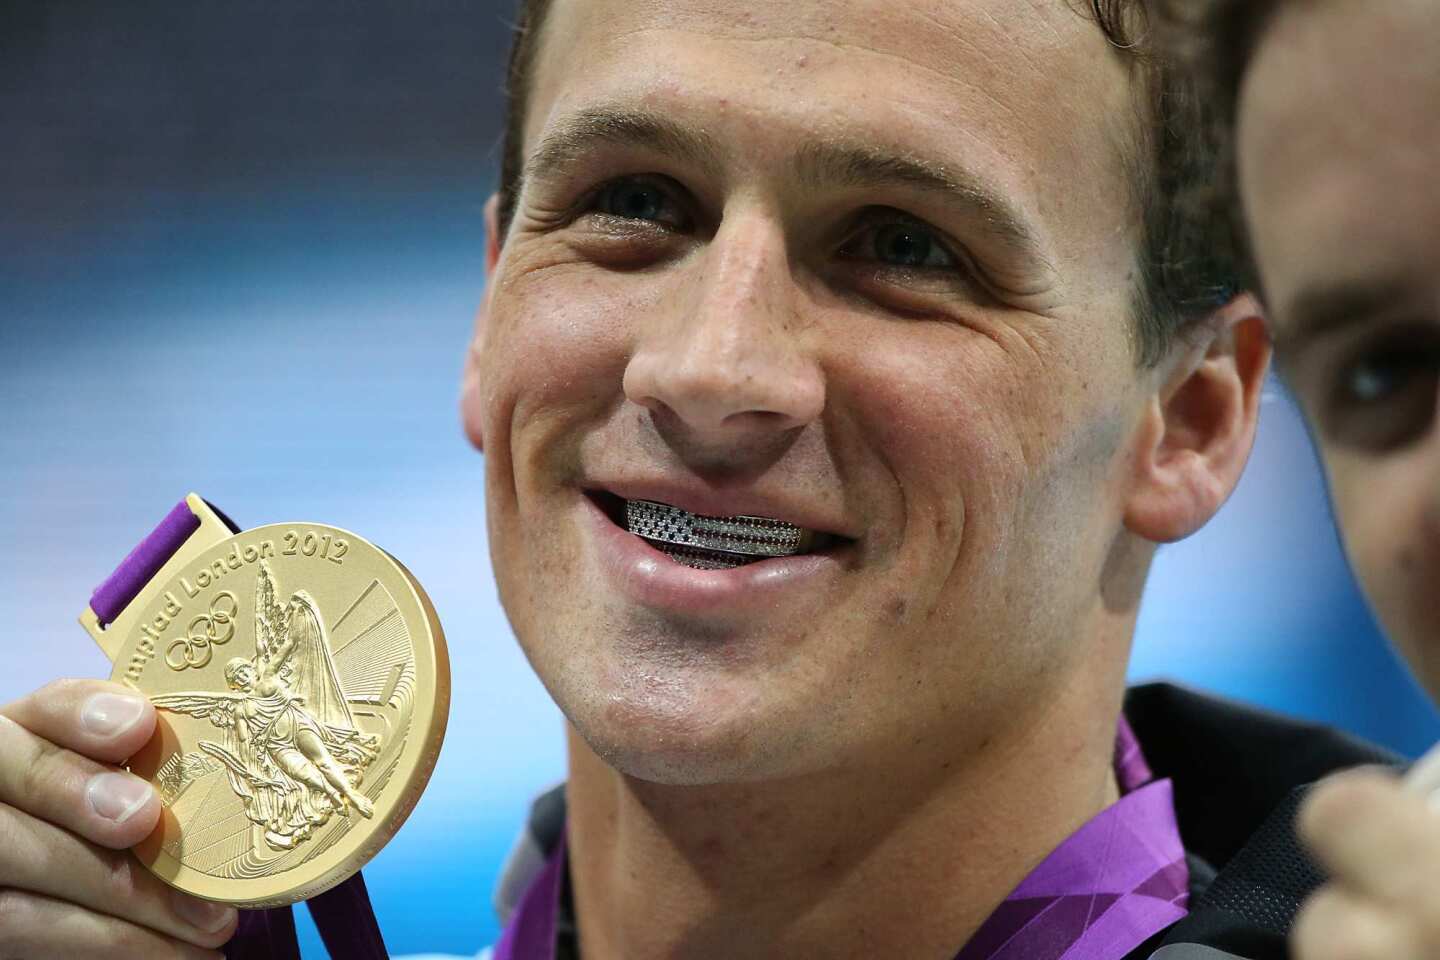 Ryan Lochte shows off his American flag grills and gold medal after winning the men's 400m individual medley.